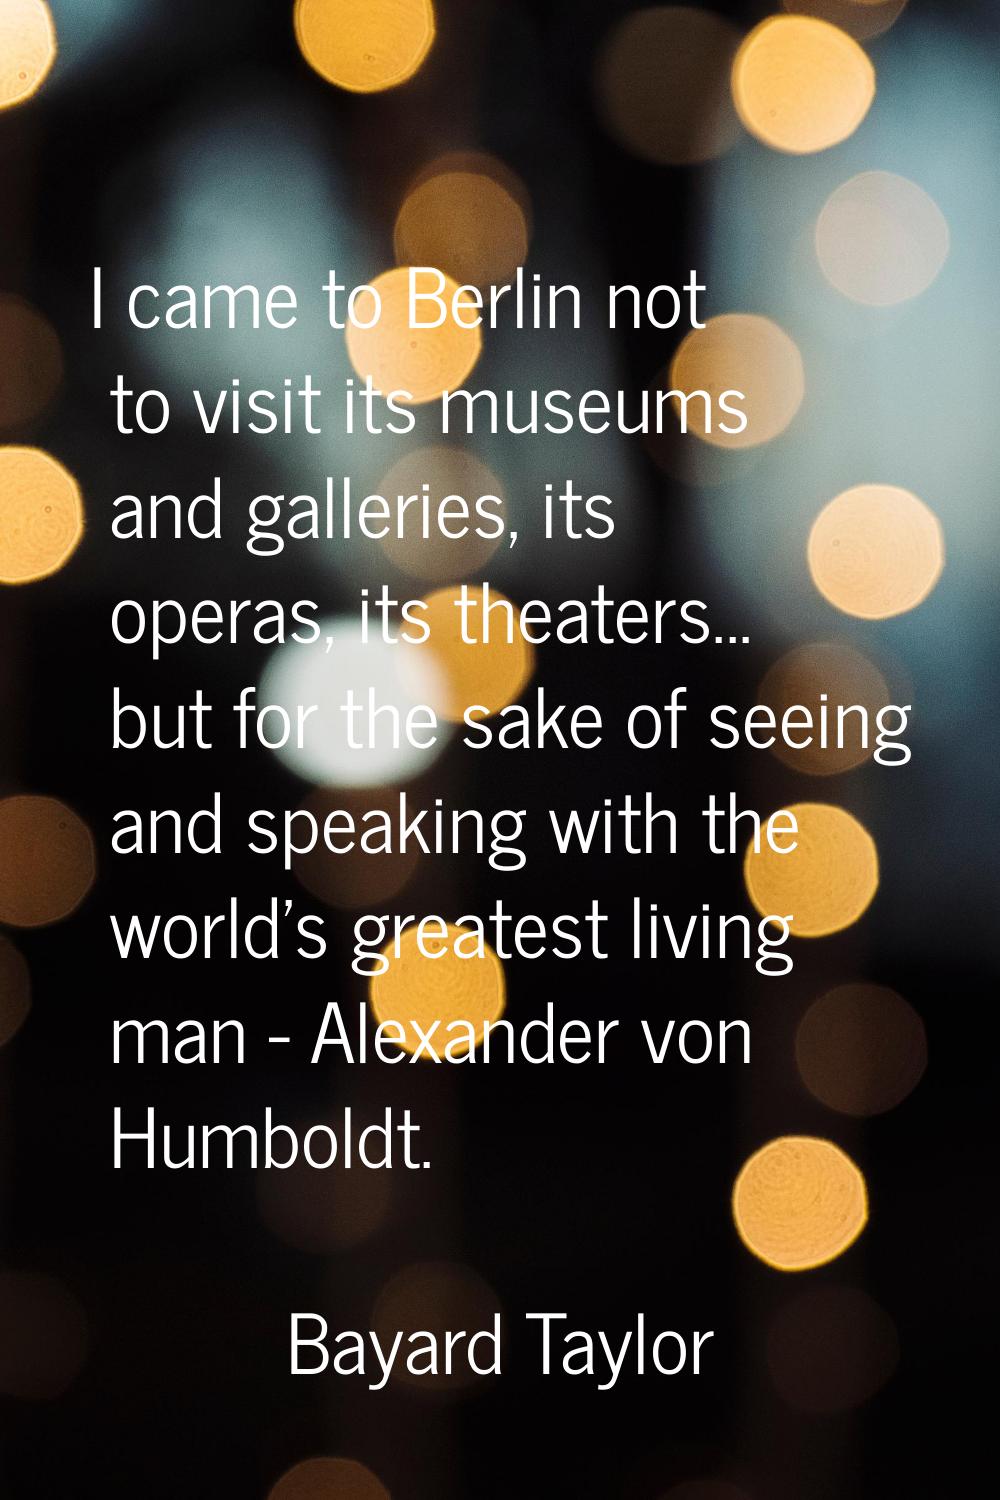 I came to Berlin not to visit its museums and galleries, its operas, its theaters... but for the sa